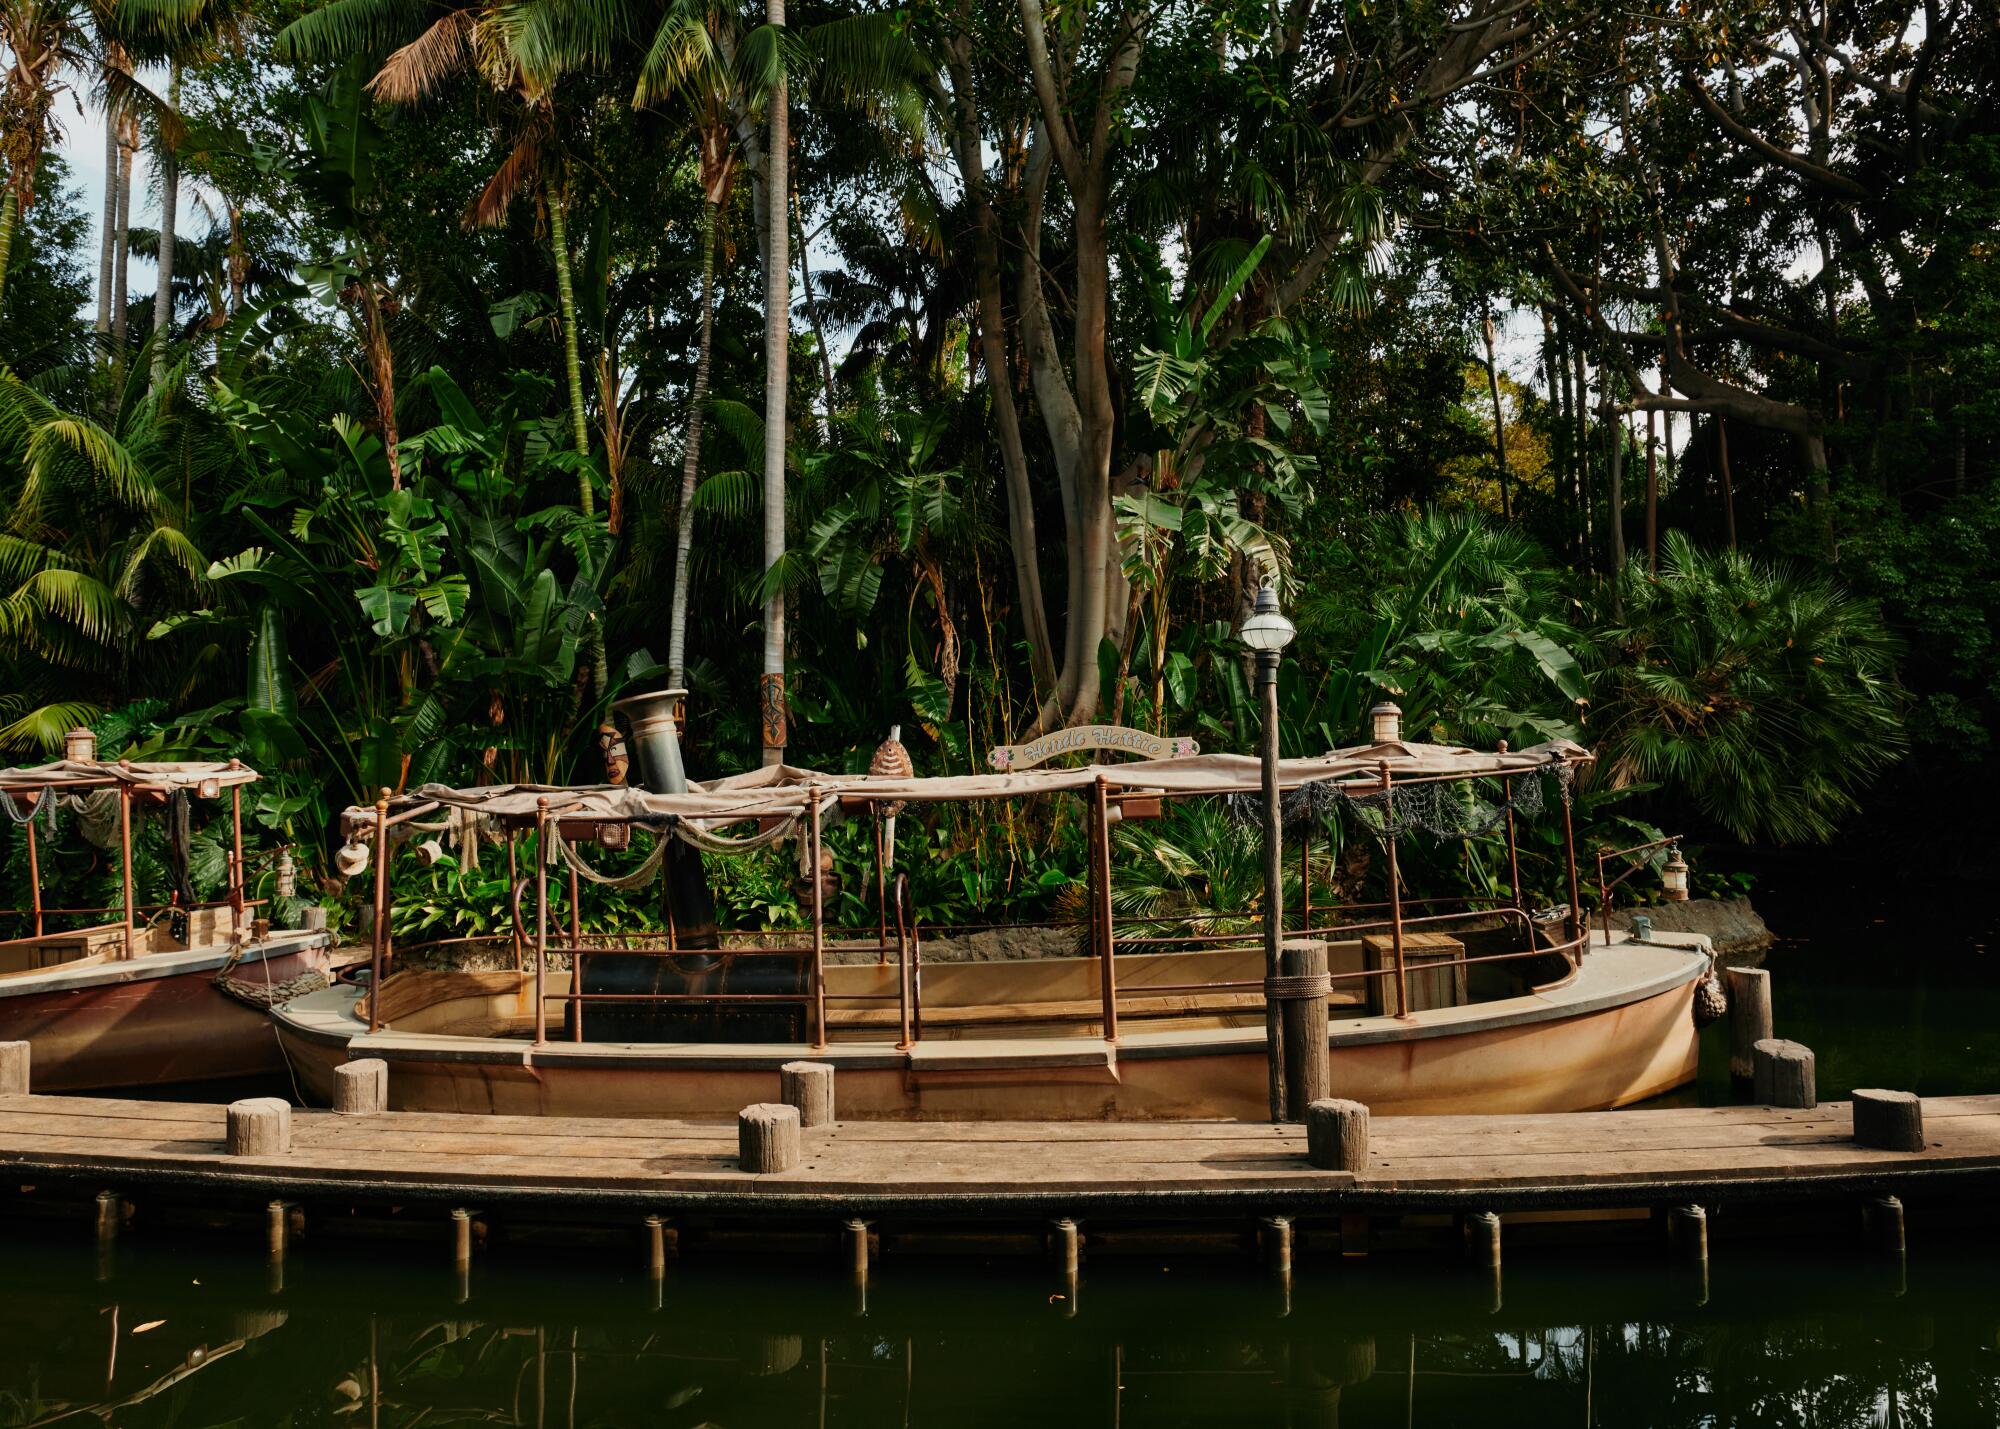 A boat that is used for Disney's Jungle Cruise ride.